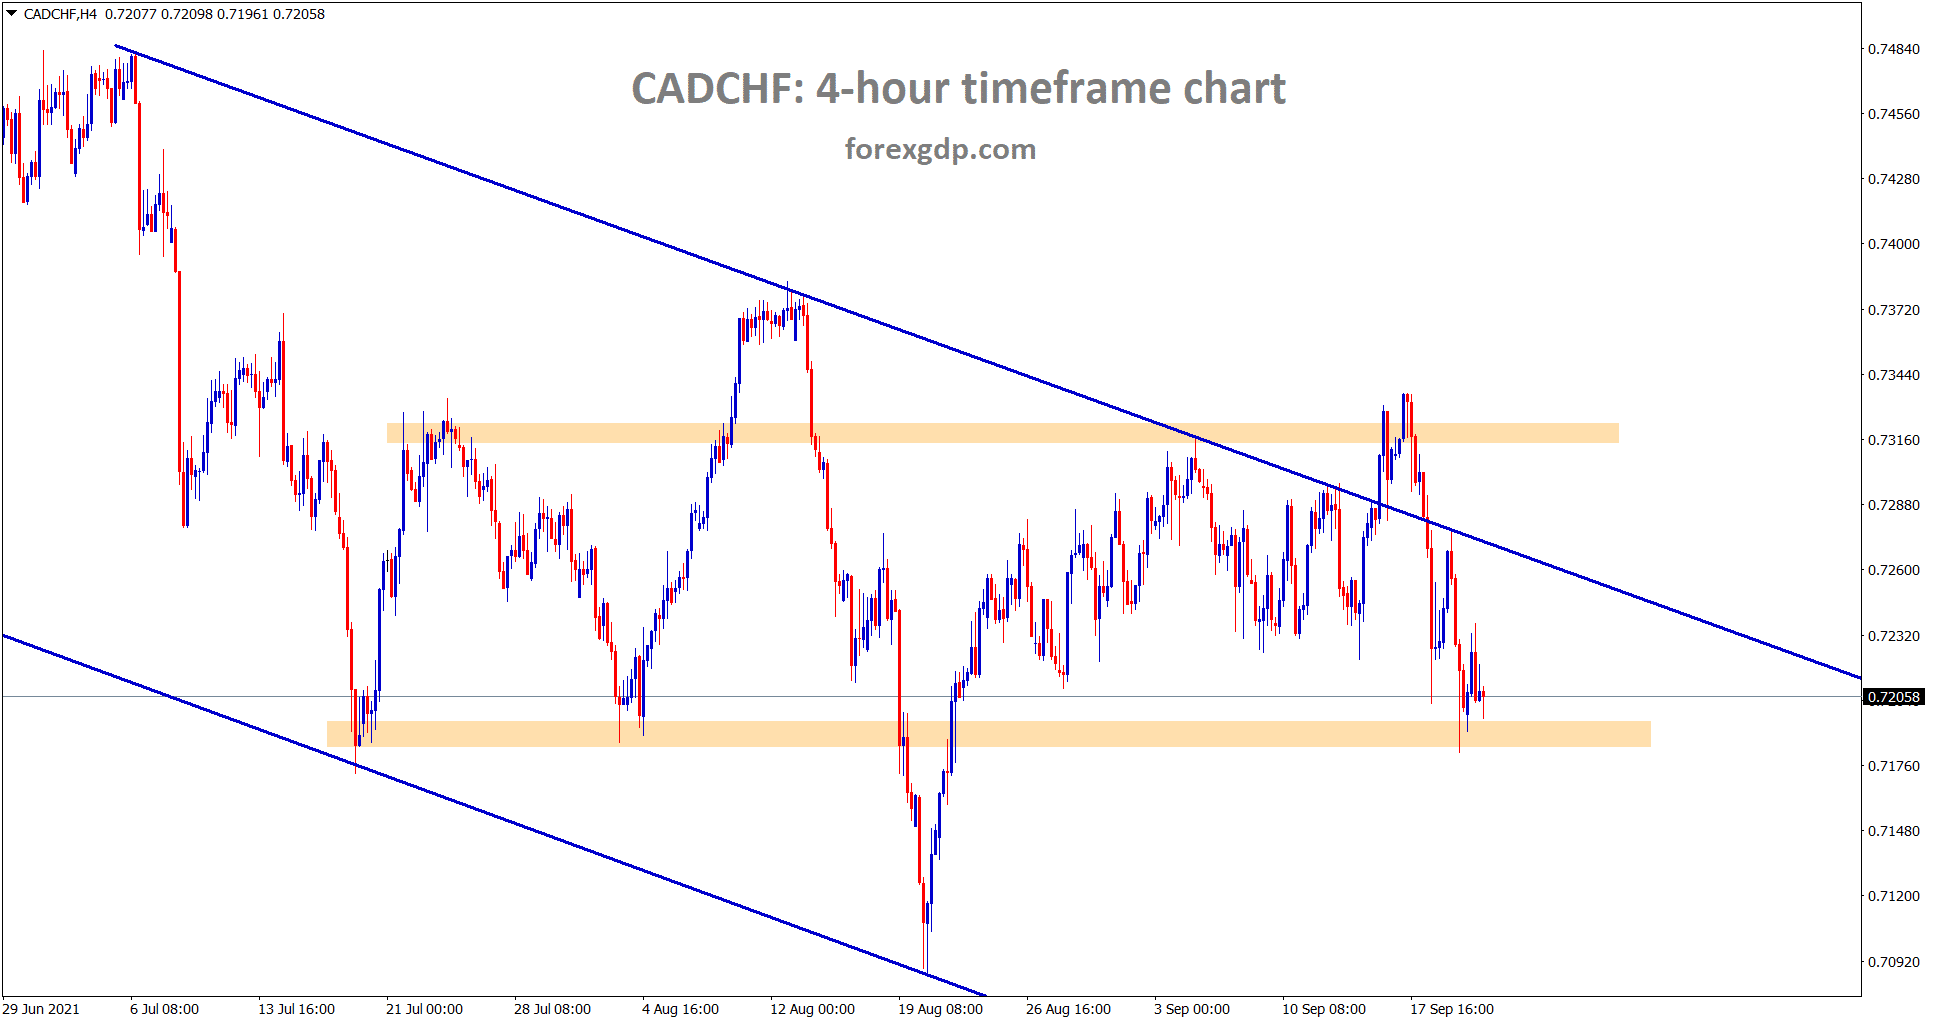 CADCHF is at the horizontal support area in a downtrend line